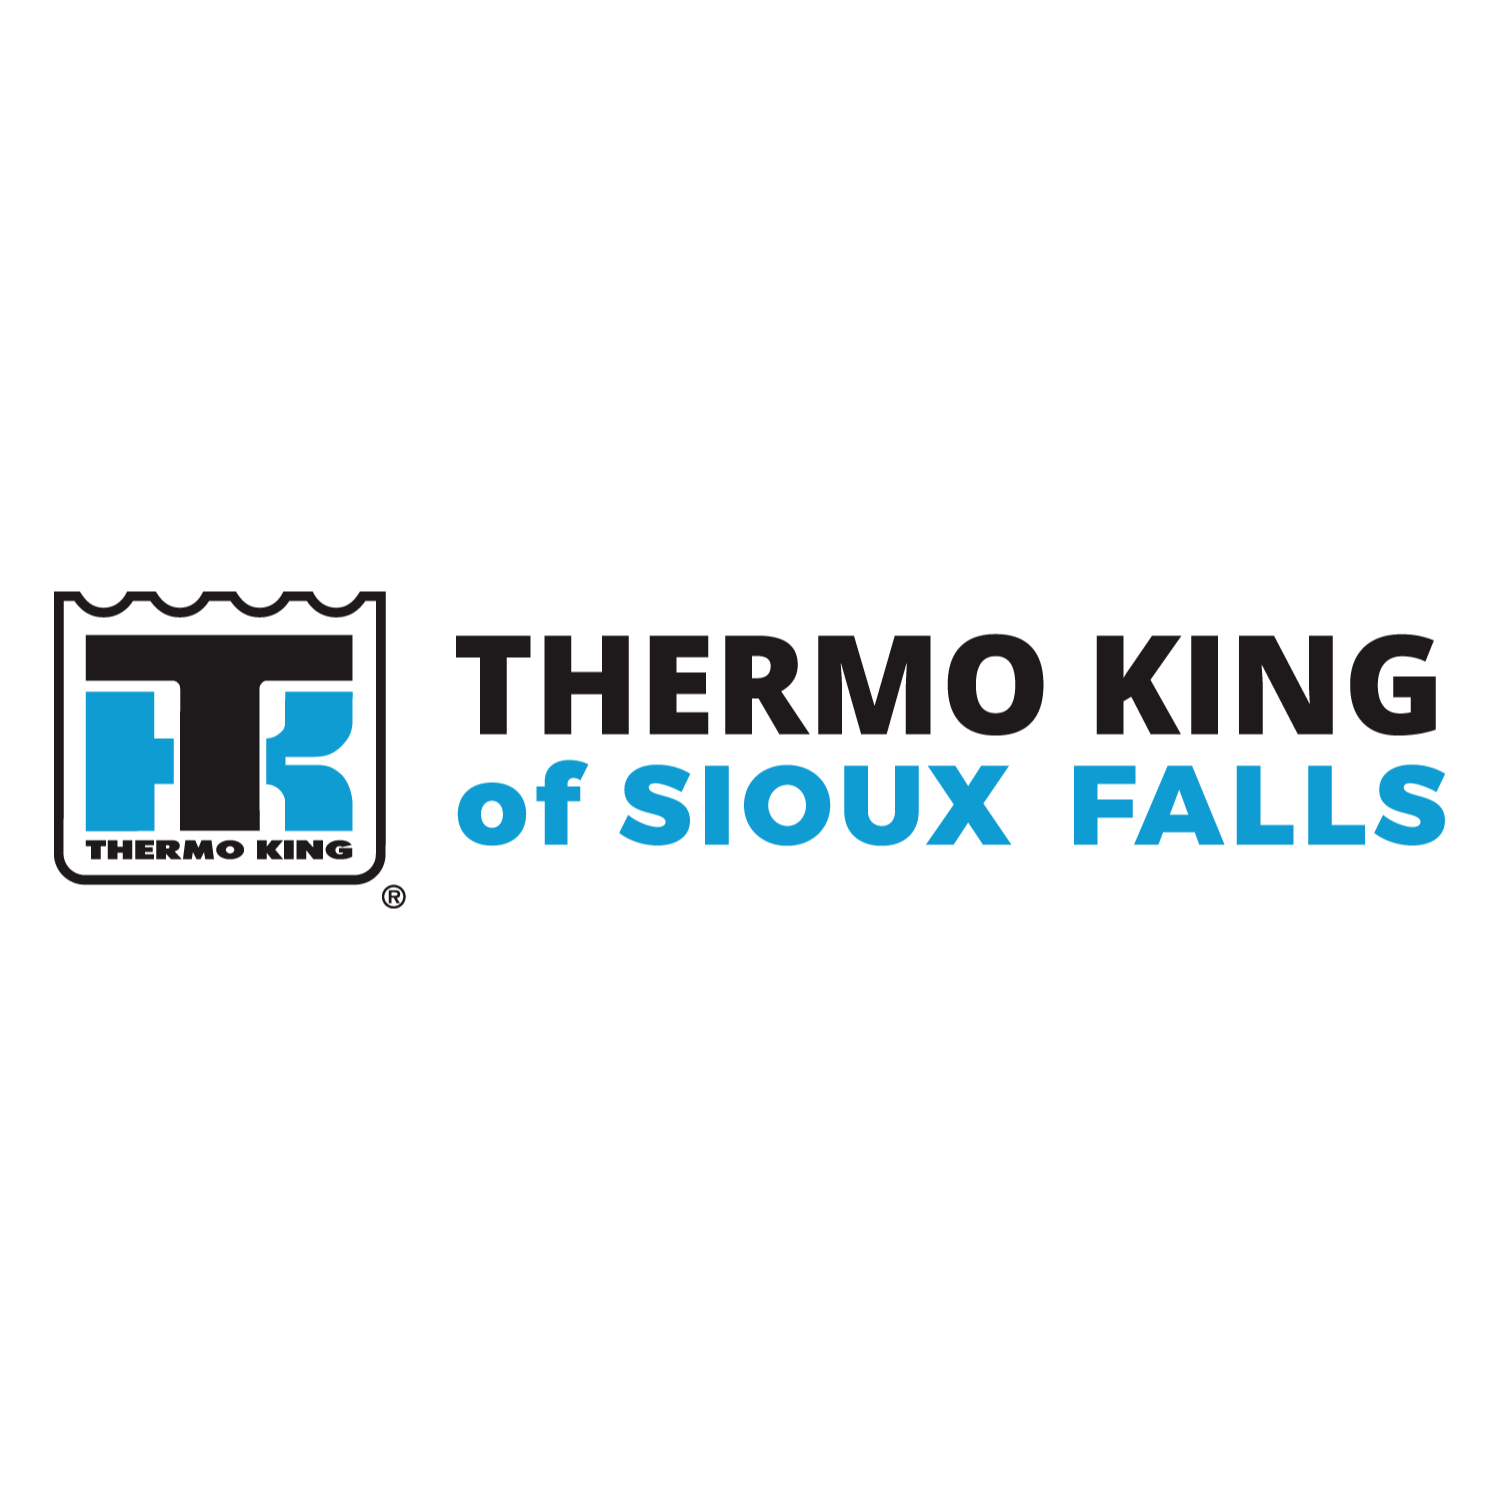 Thermo King of Sioux Falls